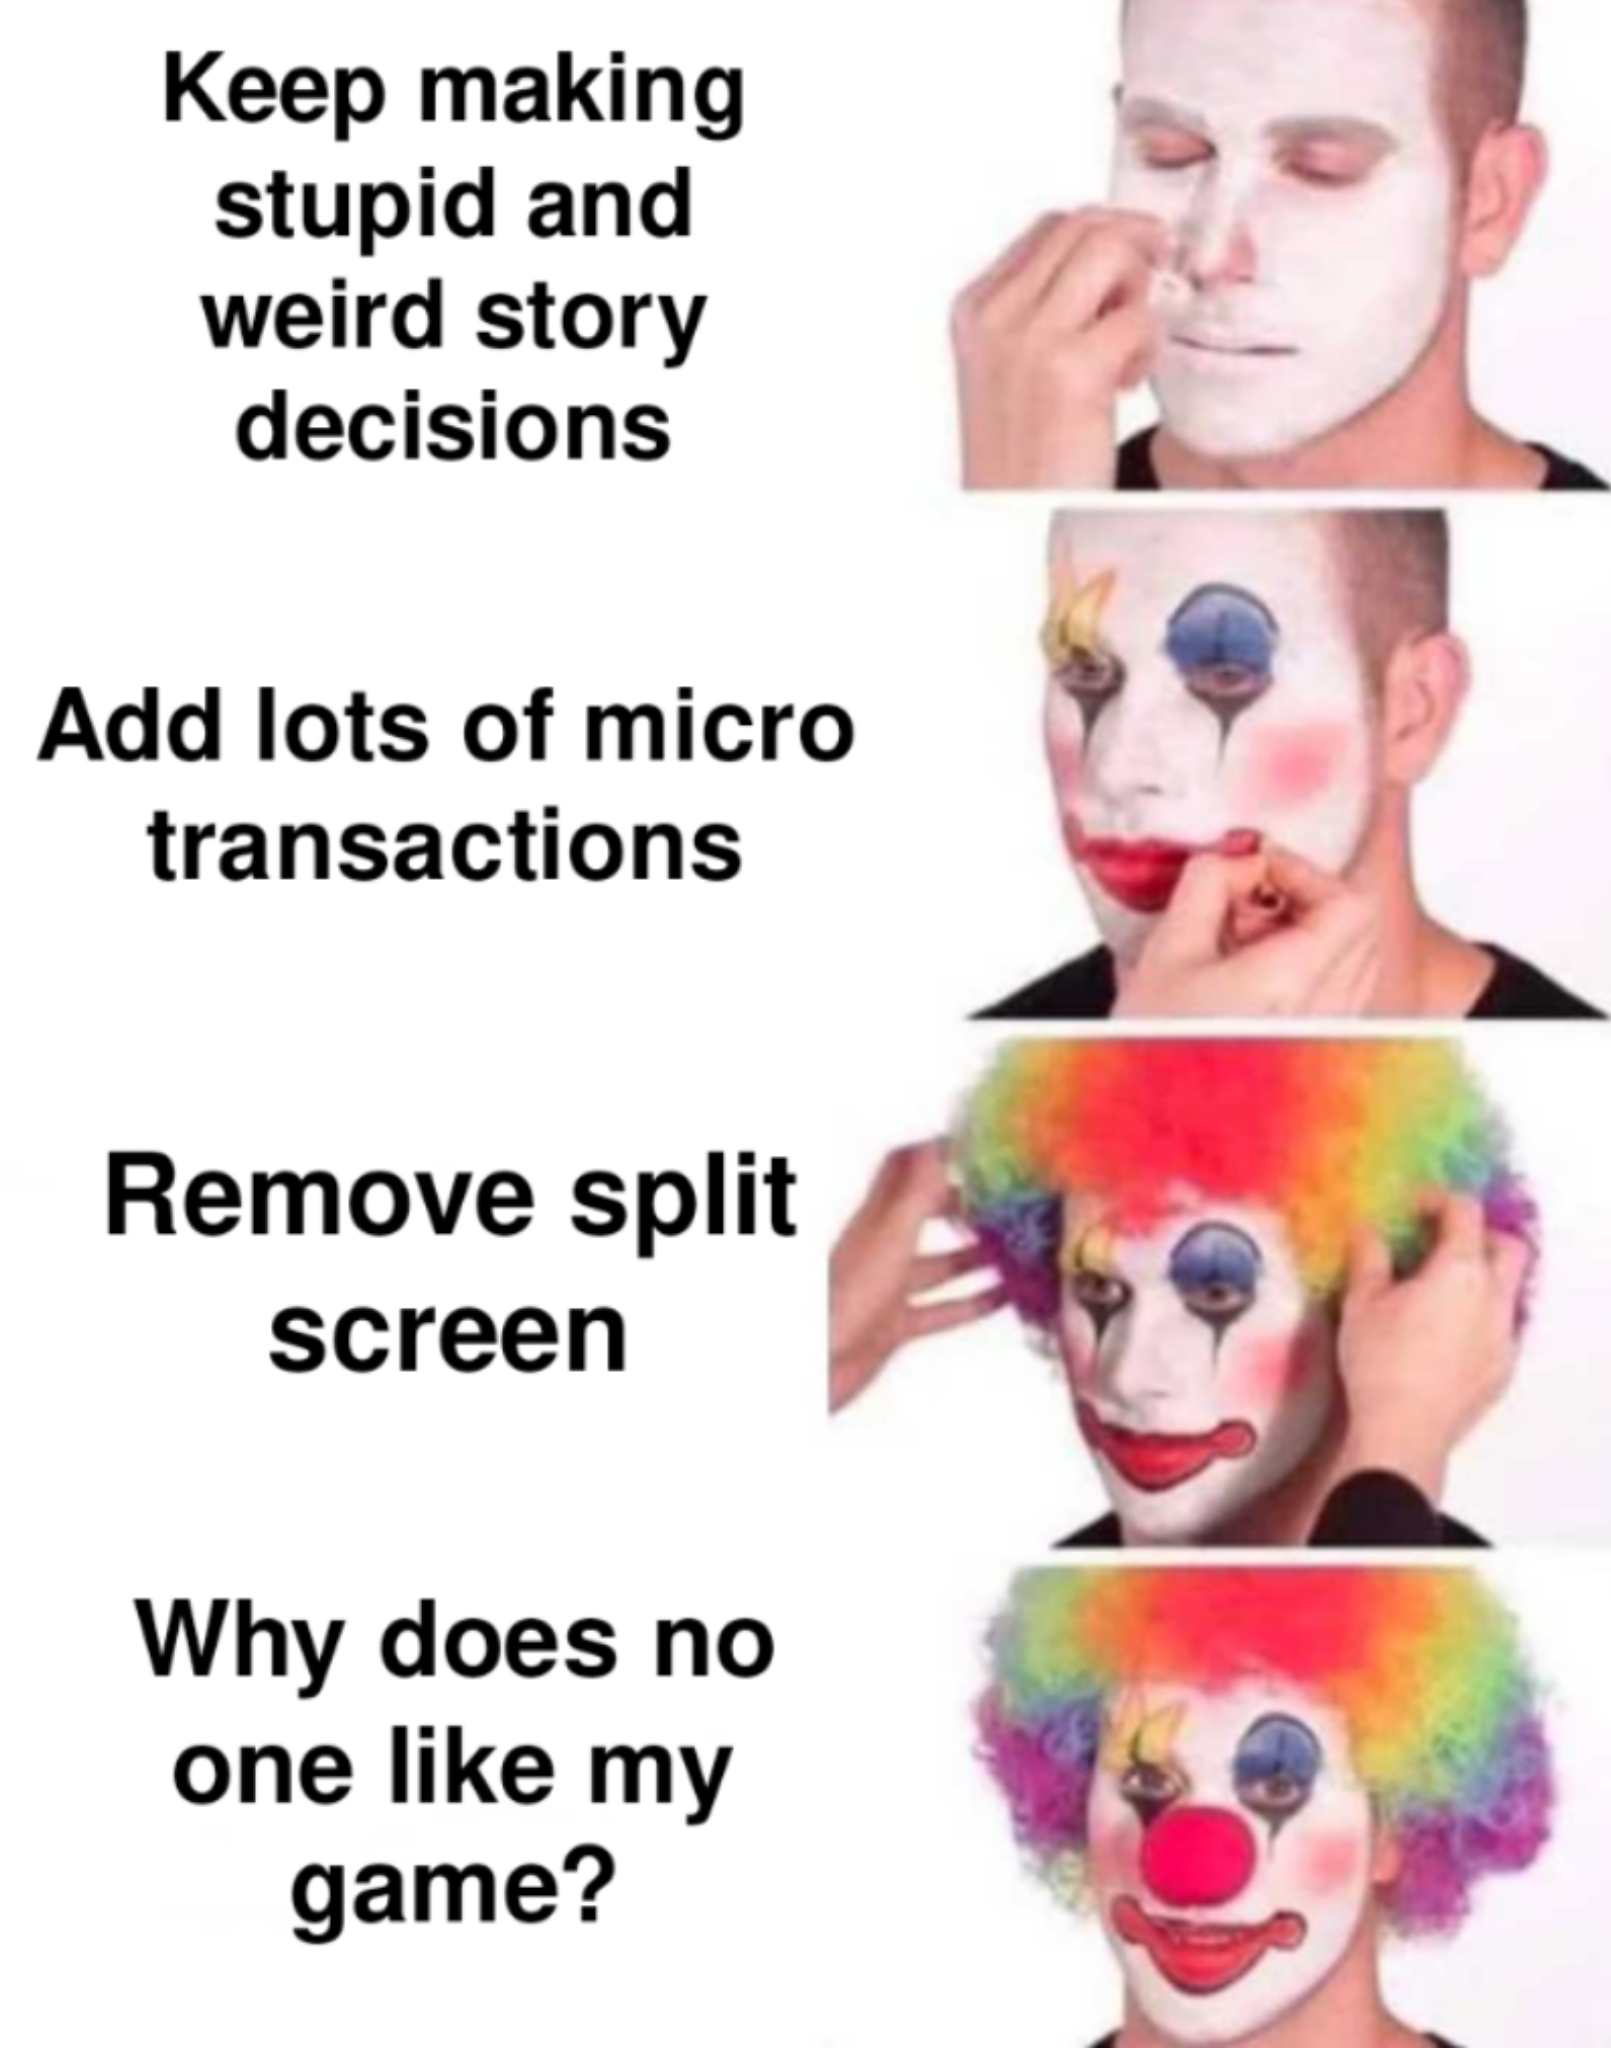 gaming memes - clown meme gacha - Keep making stupid and weird story decisions Add lots of micro transactions Remove split screen Why does no one my game?